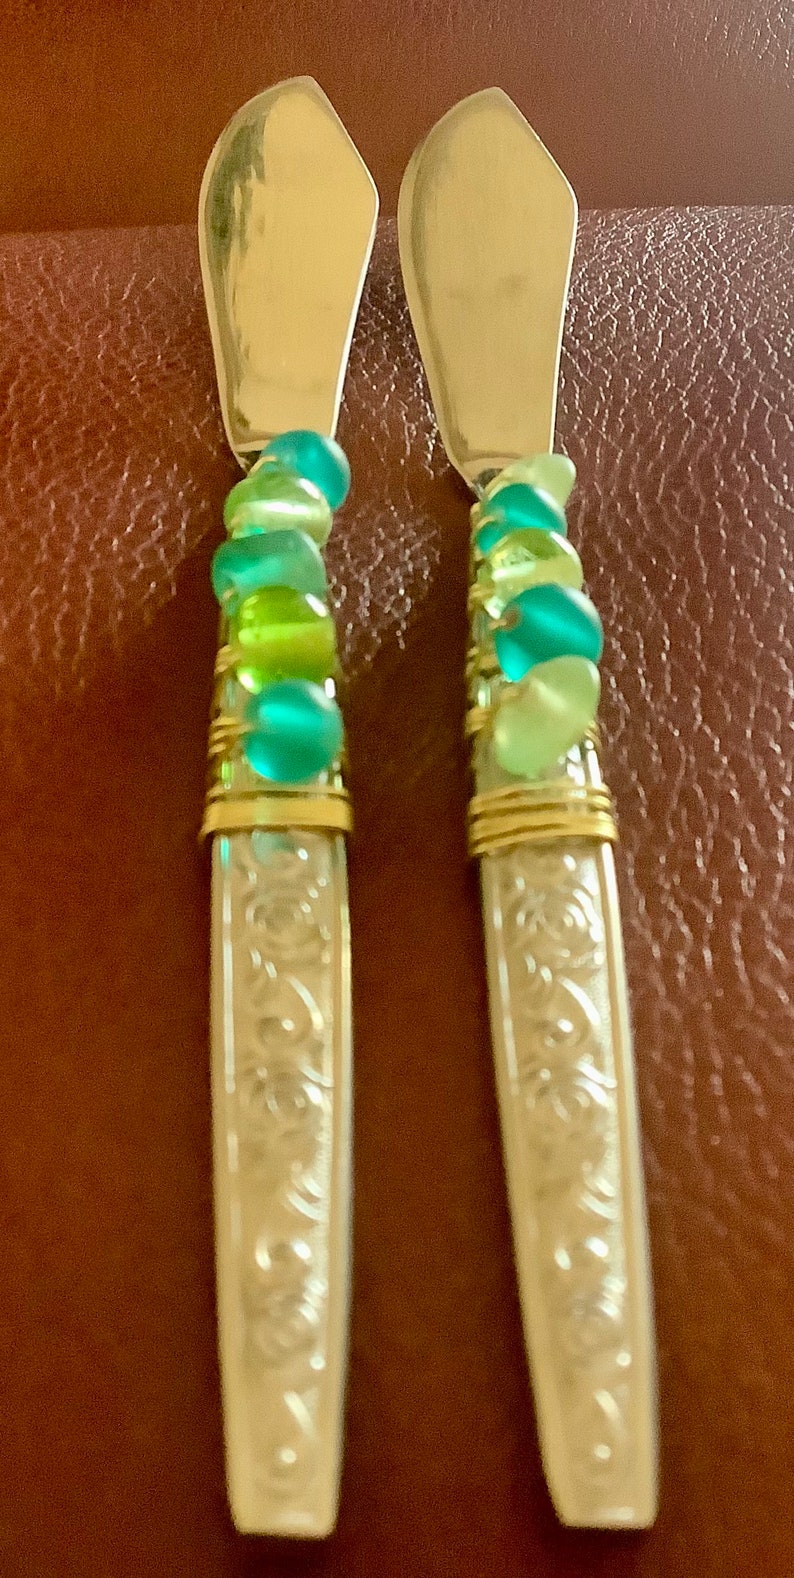 Beaded Flatware Cheese Spreaders Blue and Green Beads Serving Utensils Set of 2 image 7